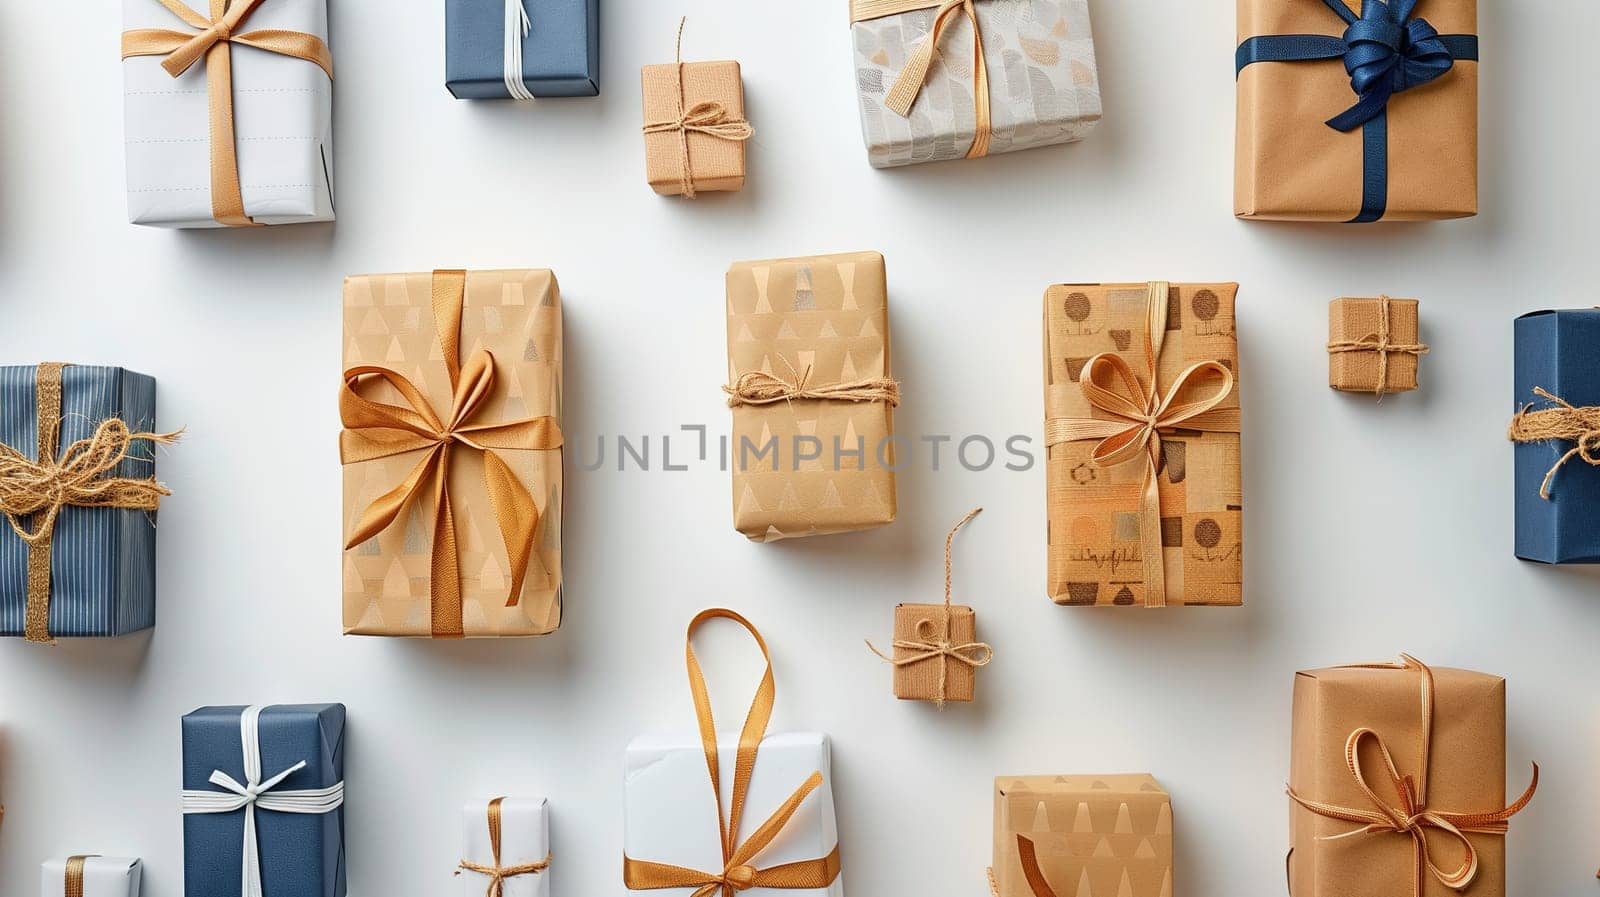 Group of Wrapped Presents for Sale by TRMK